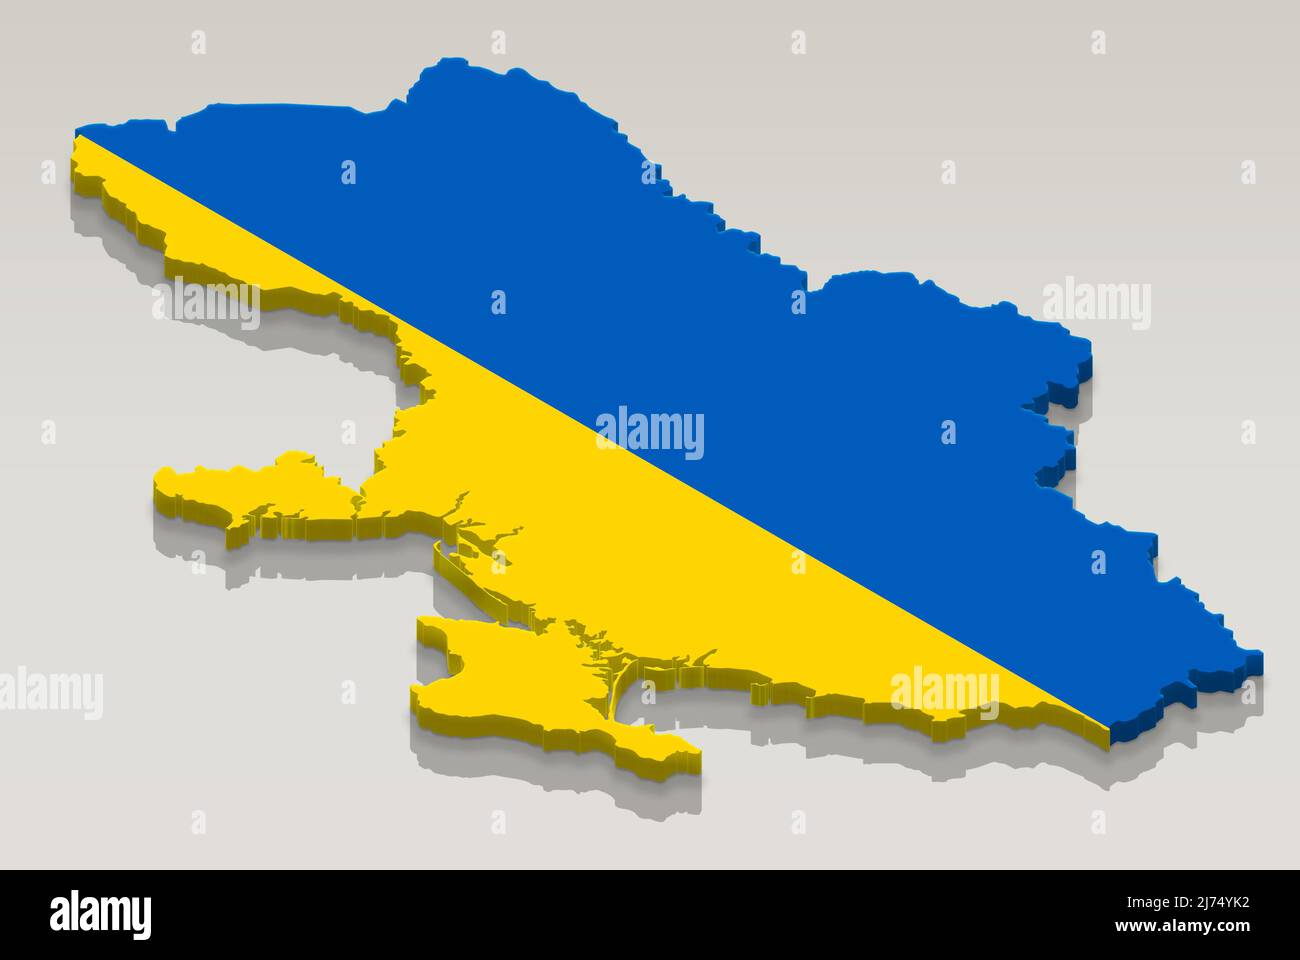 Ukraine flag on map, flag design in form of country map, concept of Ukraine news, relief map idea Stock Photo